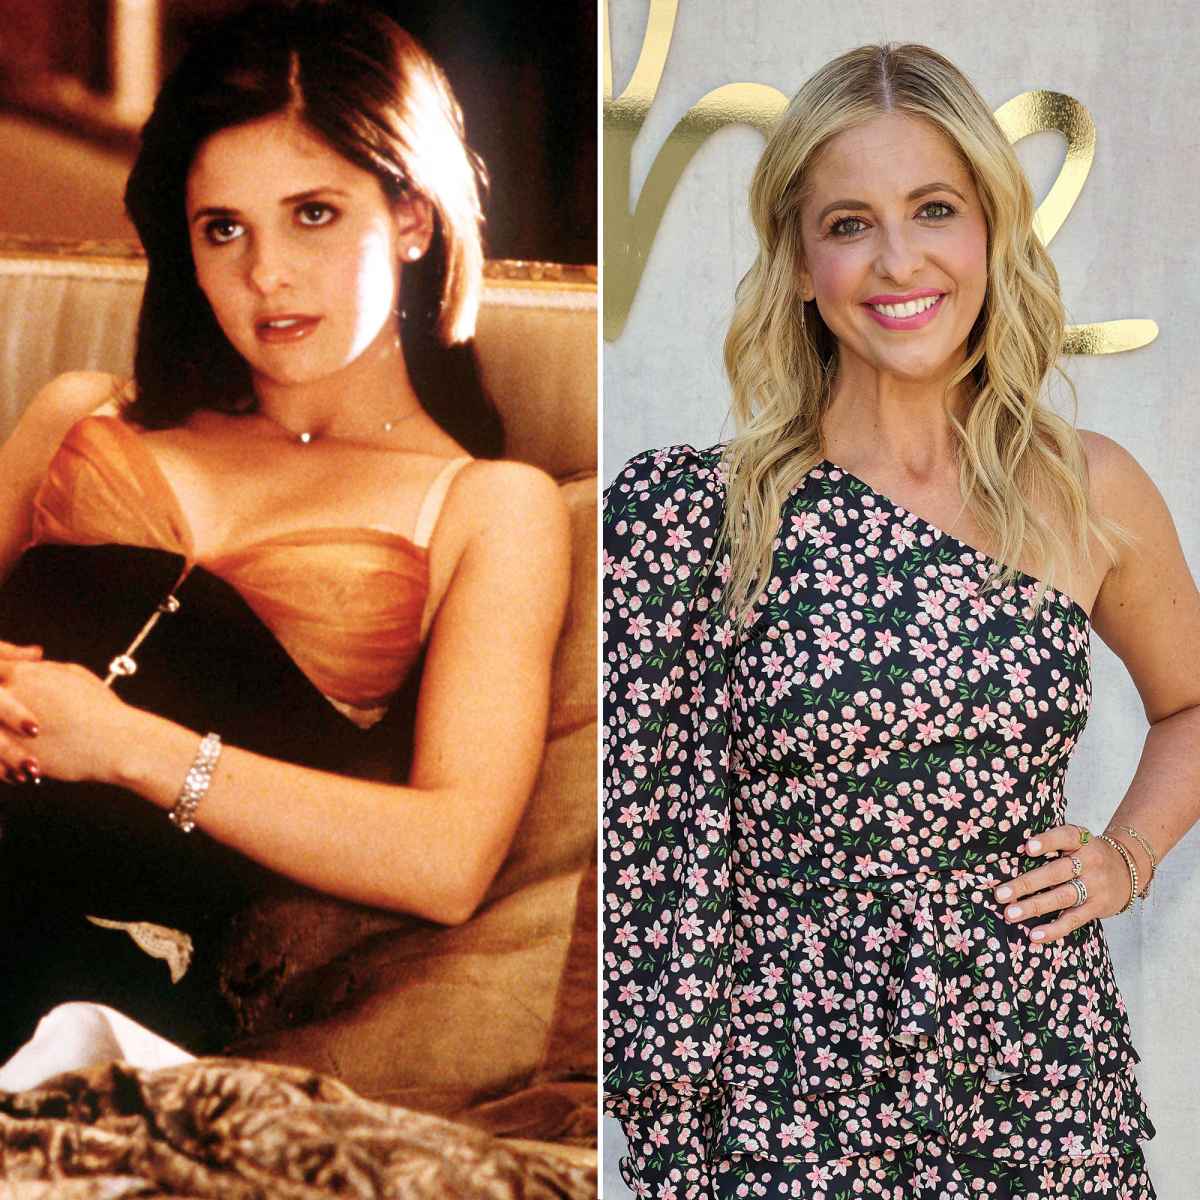 Cruel Intentions' Power Rankings: Then and Now